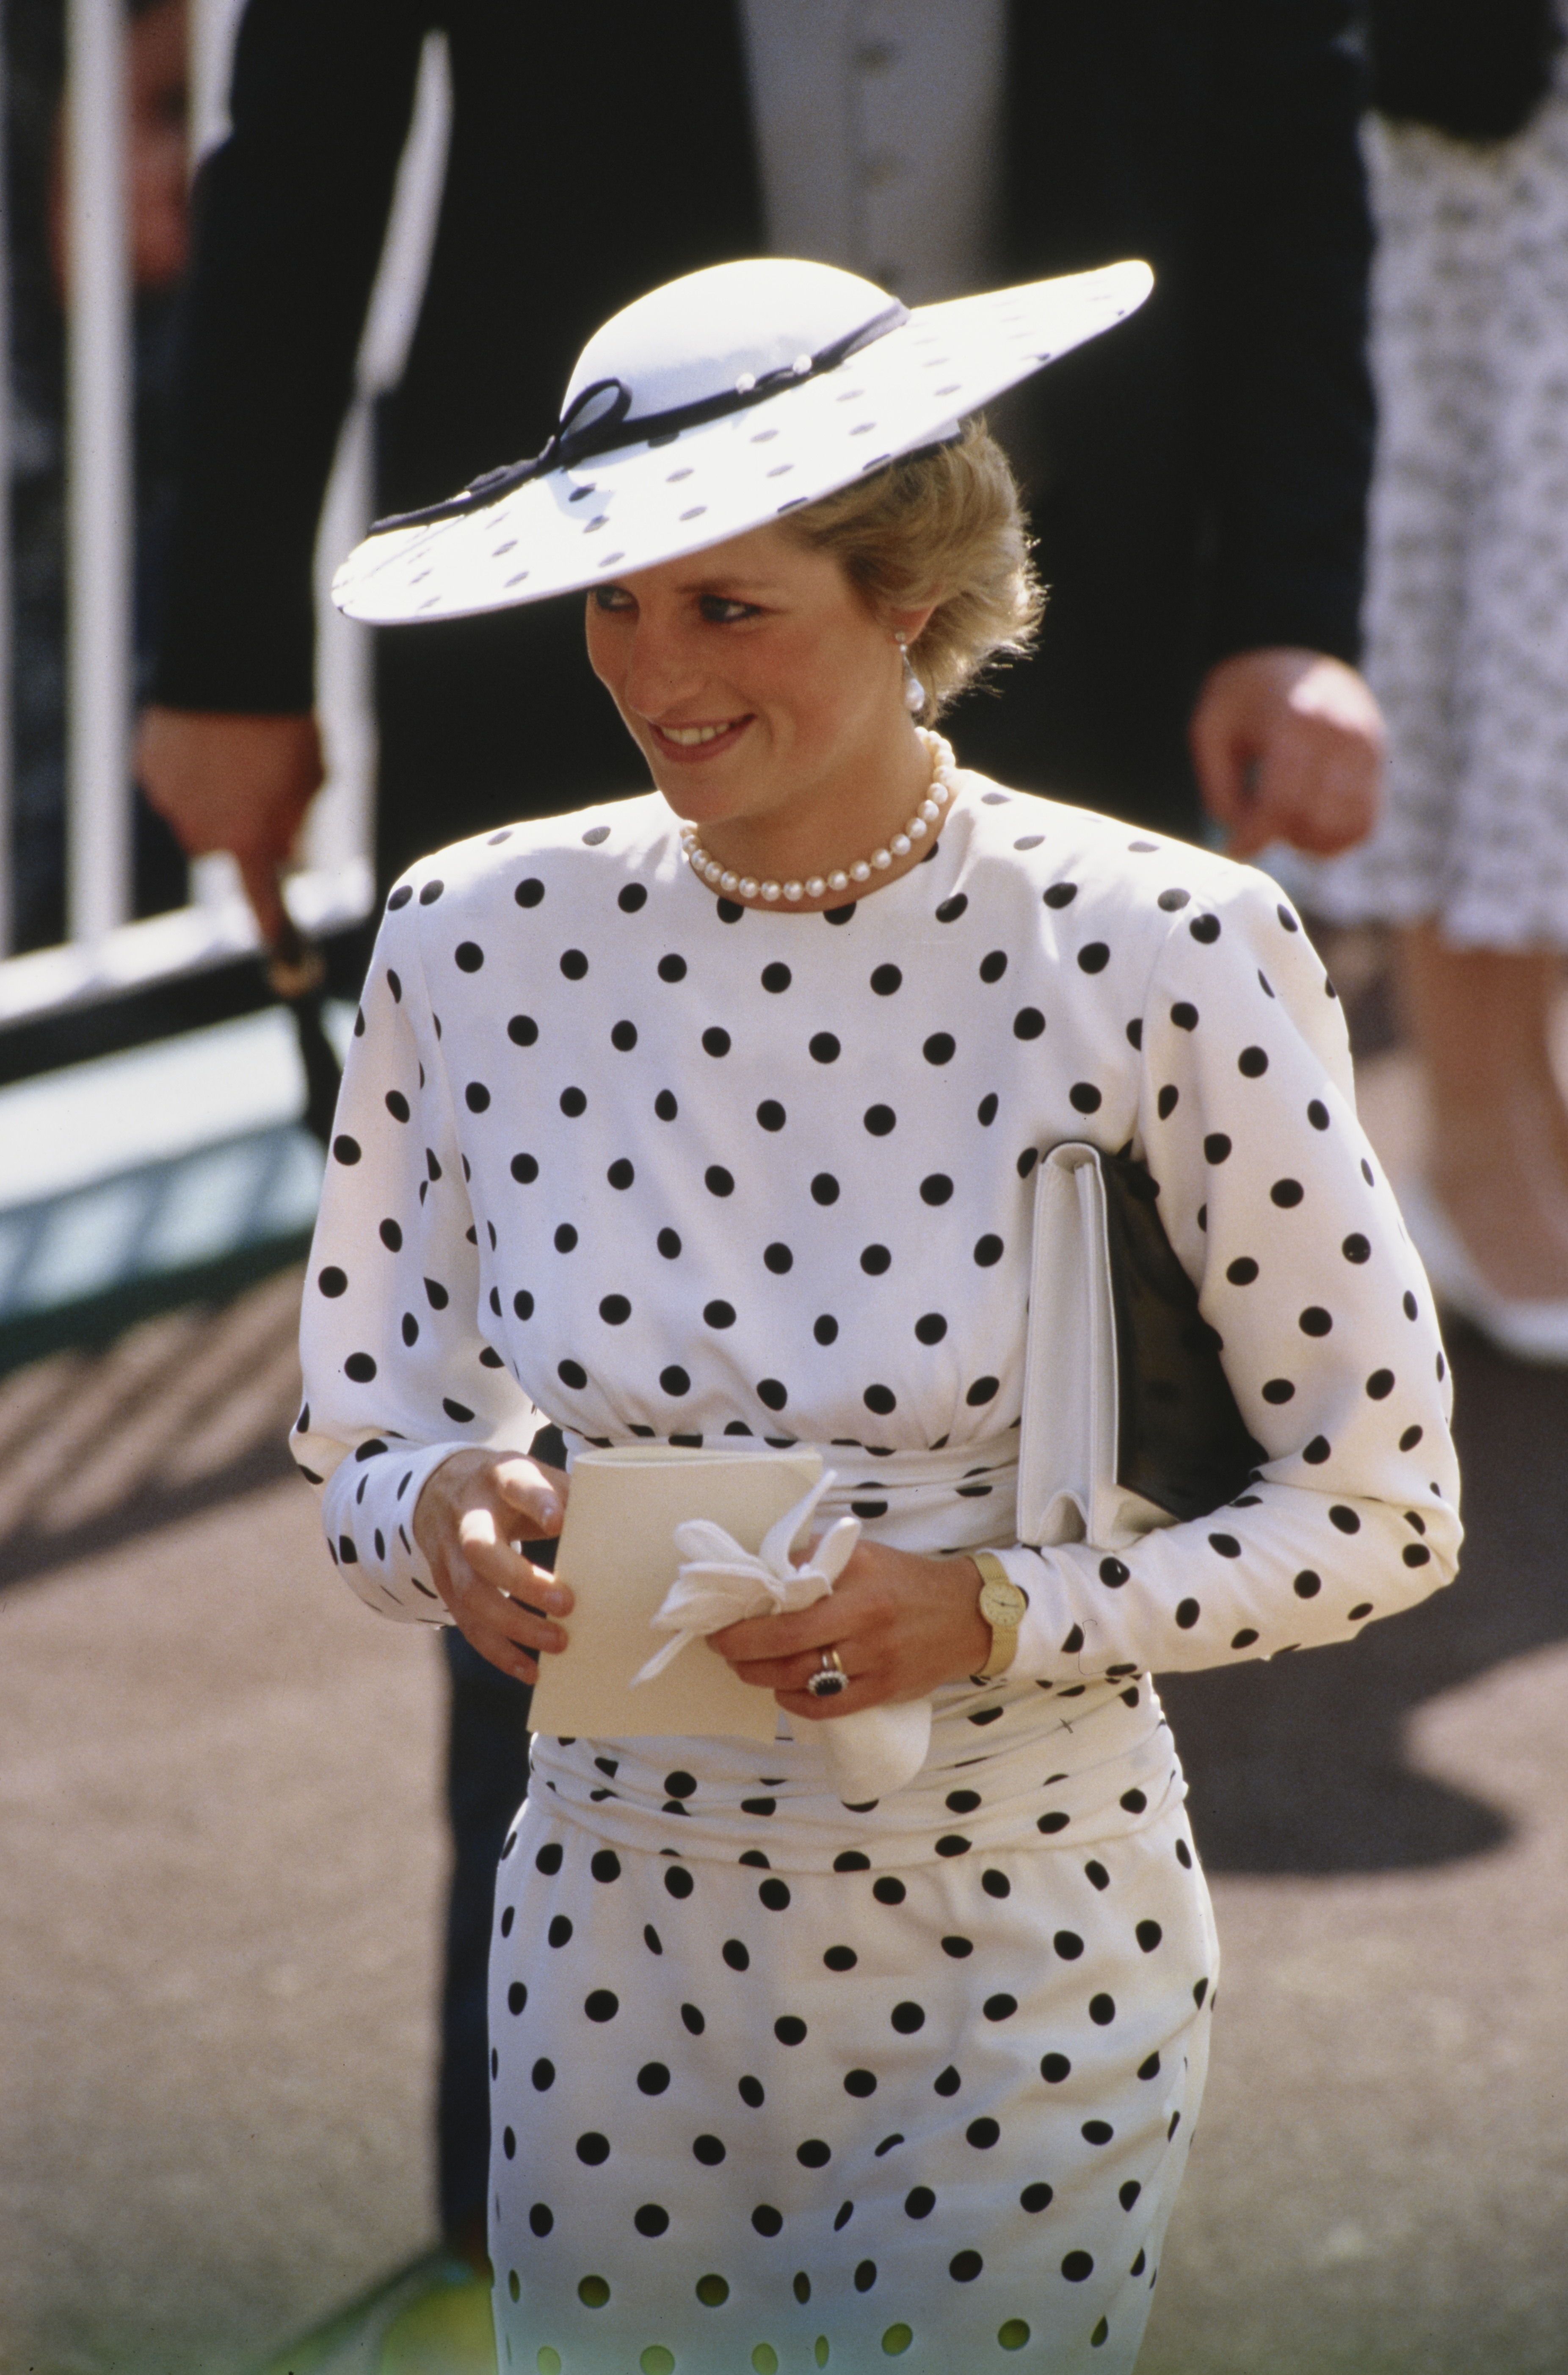 Princess Diana at the Ascot race in England in June 1988. | Source: Getty Images